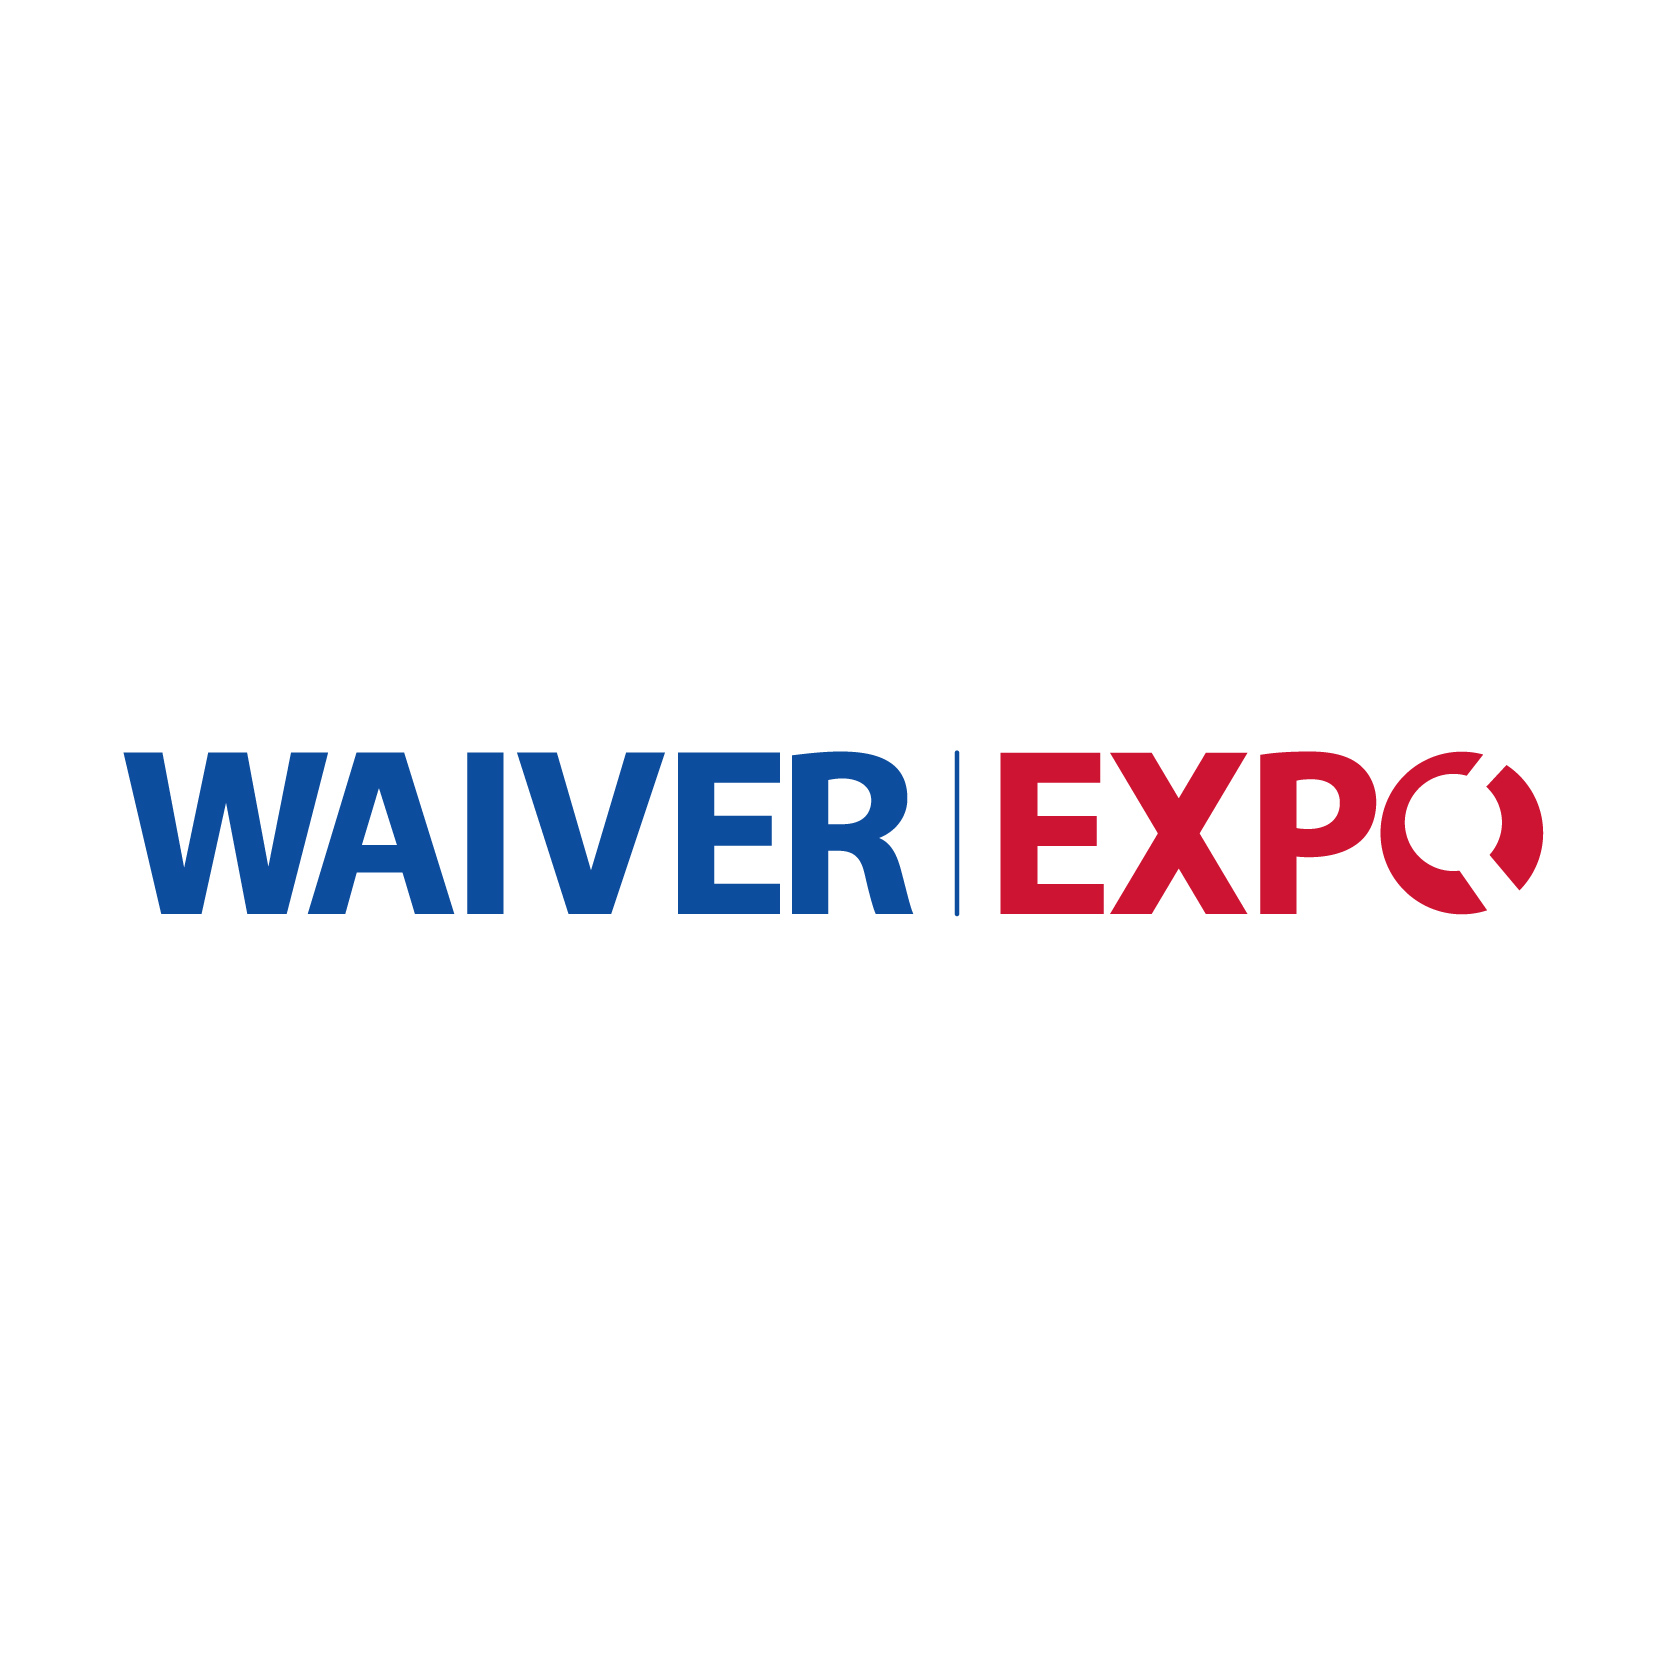 Waiver Expo